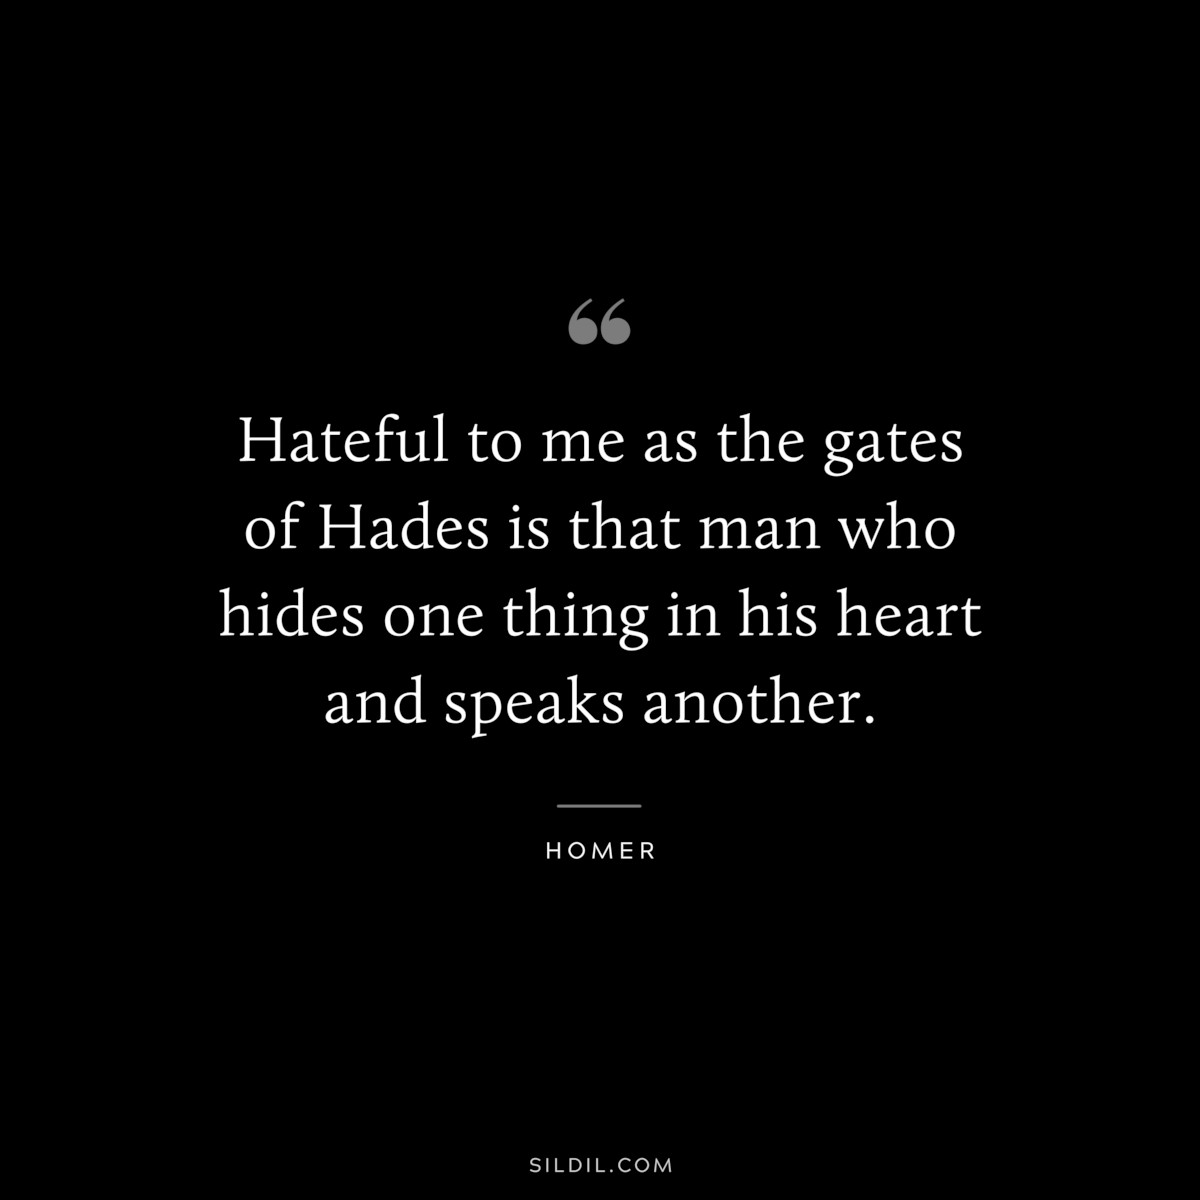 Hateful to me as the gates of Hades is that man who hides one thing in his heart and speaks another. ― Homer